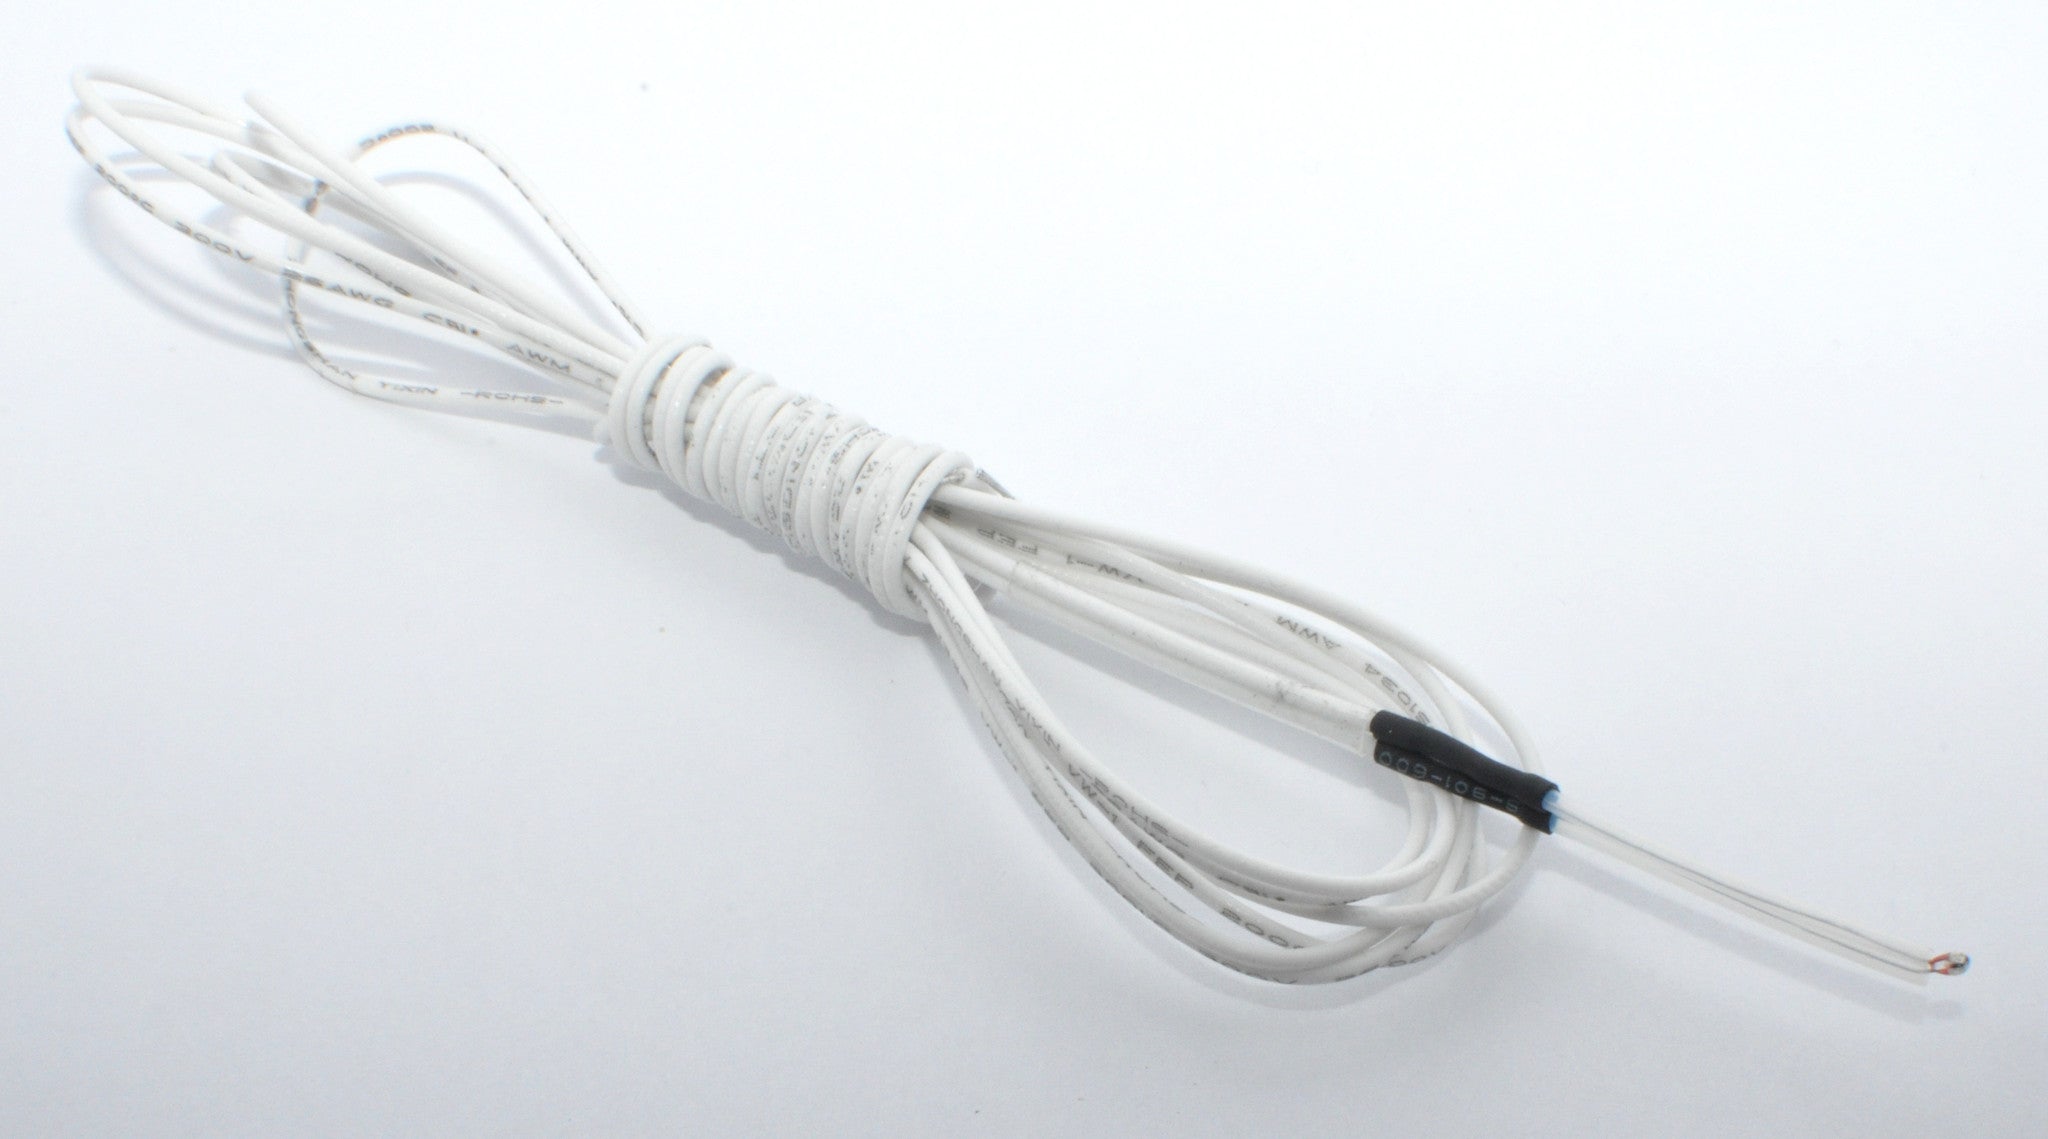 100K NTC 3950 Thermistor with cable